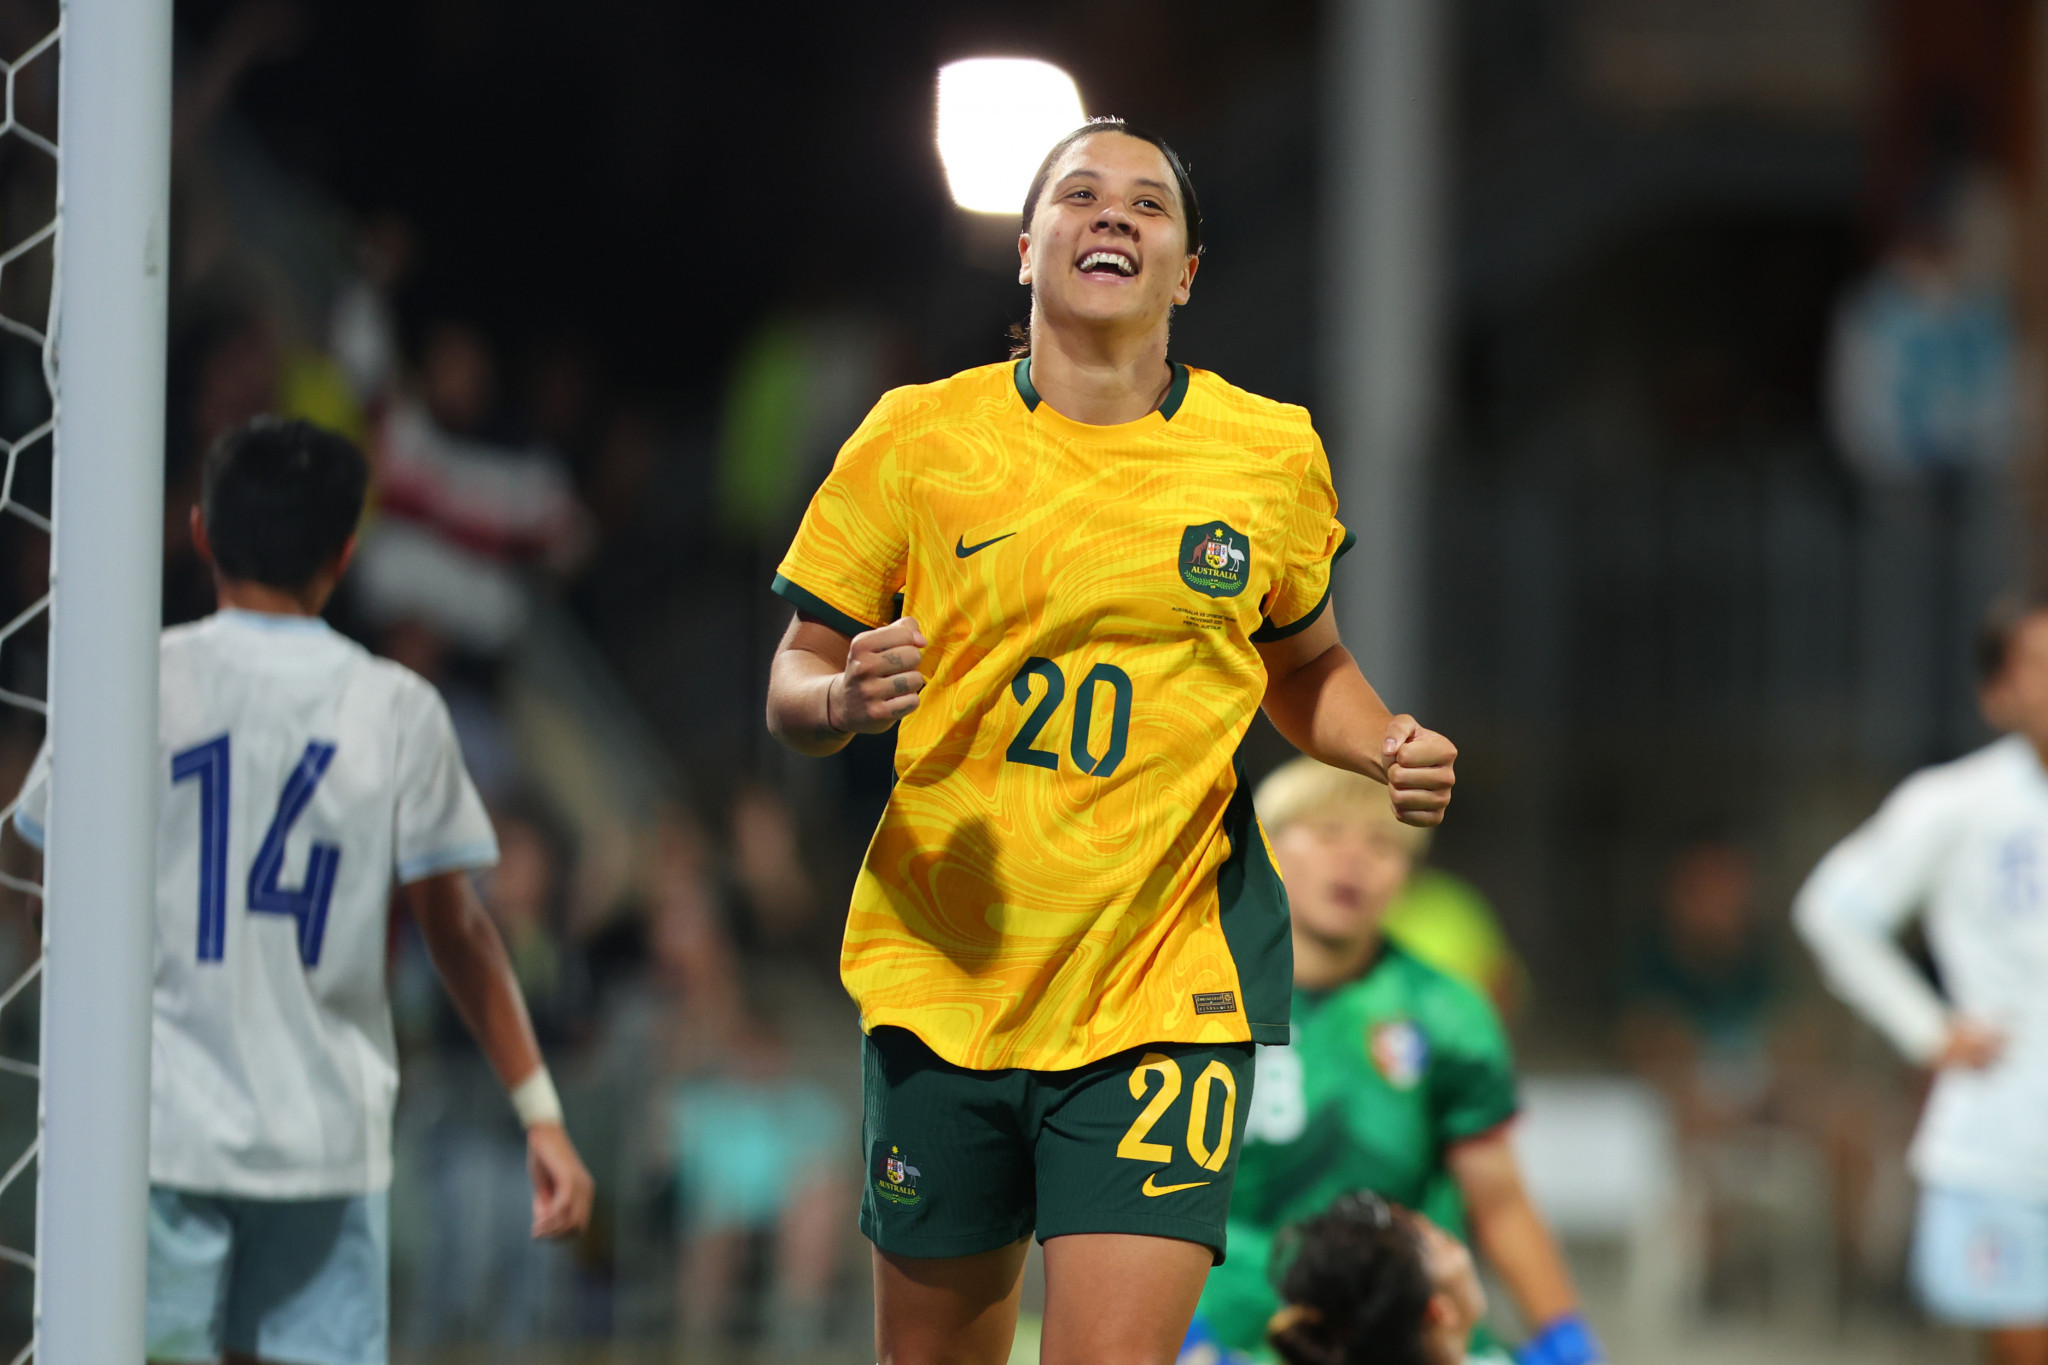 Sam Kerr will be absent from the upcoming Paris 2024 Olympics due to injury. GETTY IMAGES